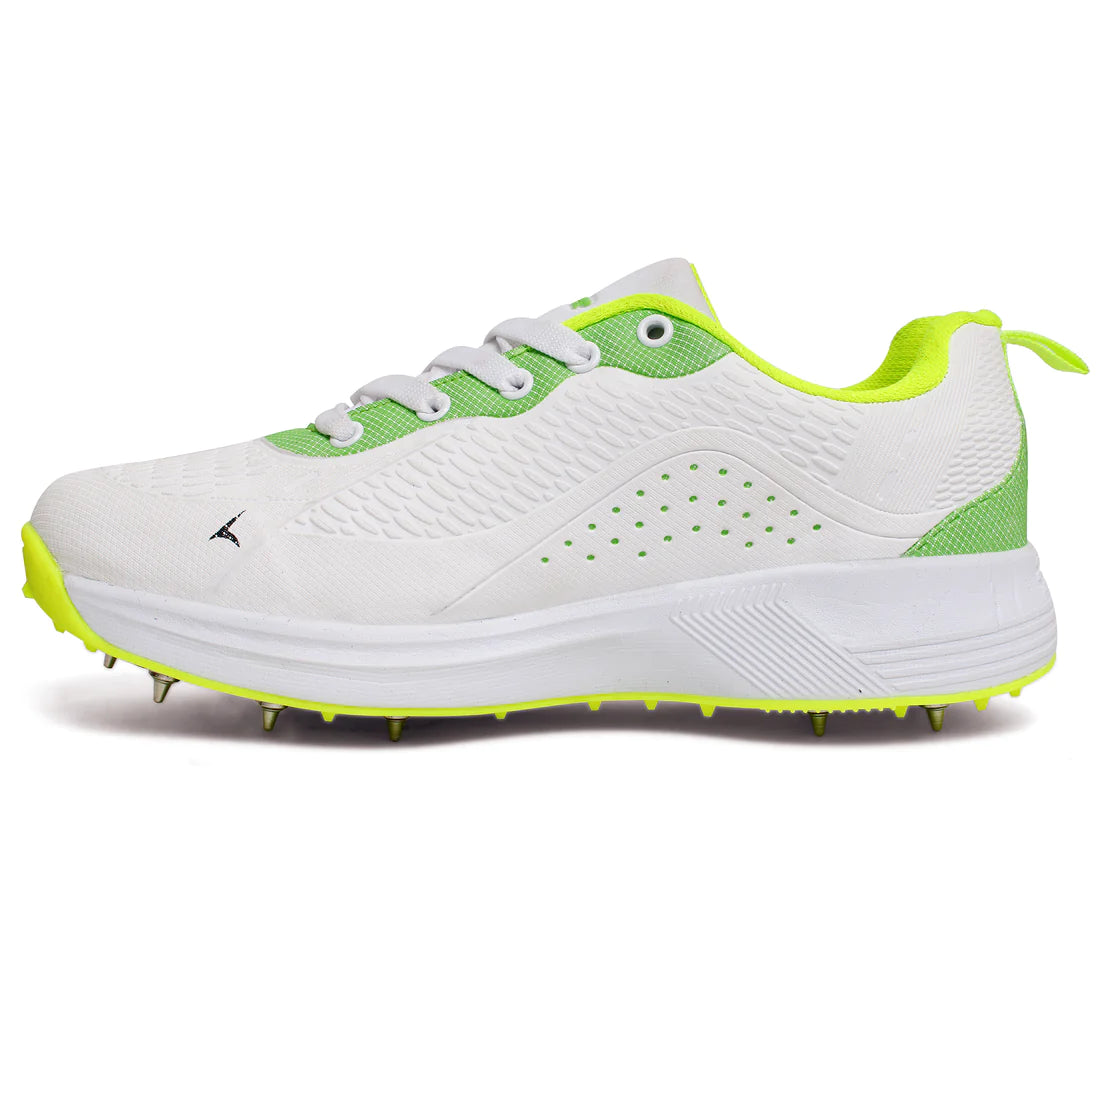 Tracer T-Spinner 294 Spikes Cricket Shoes - White/Green